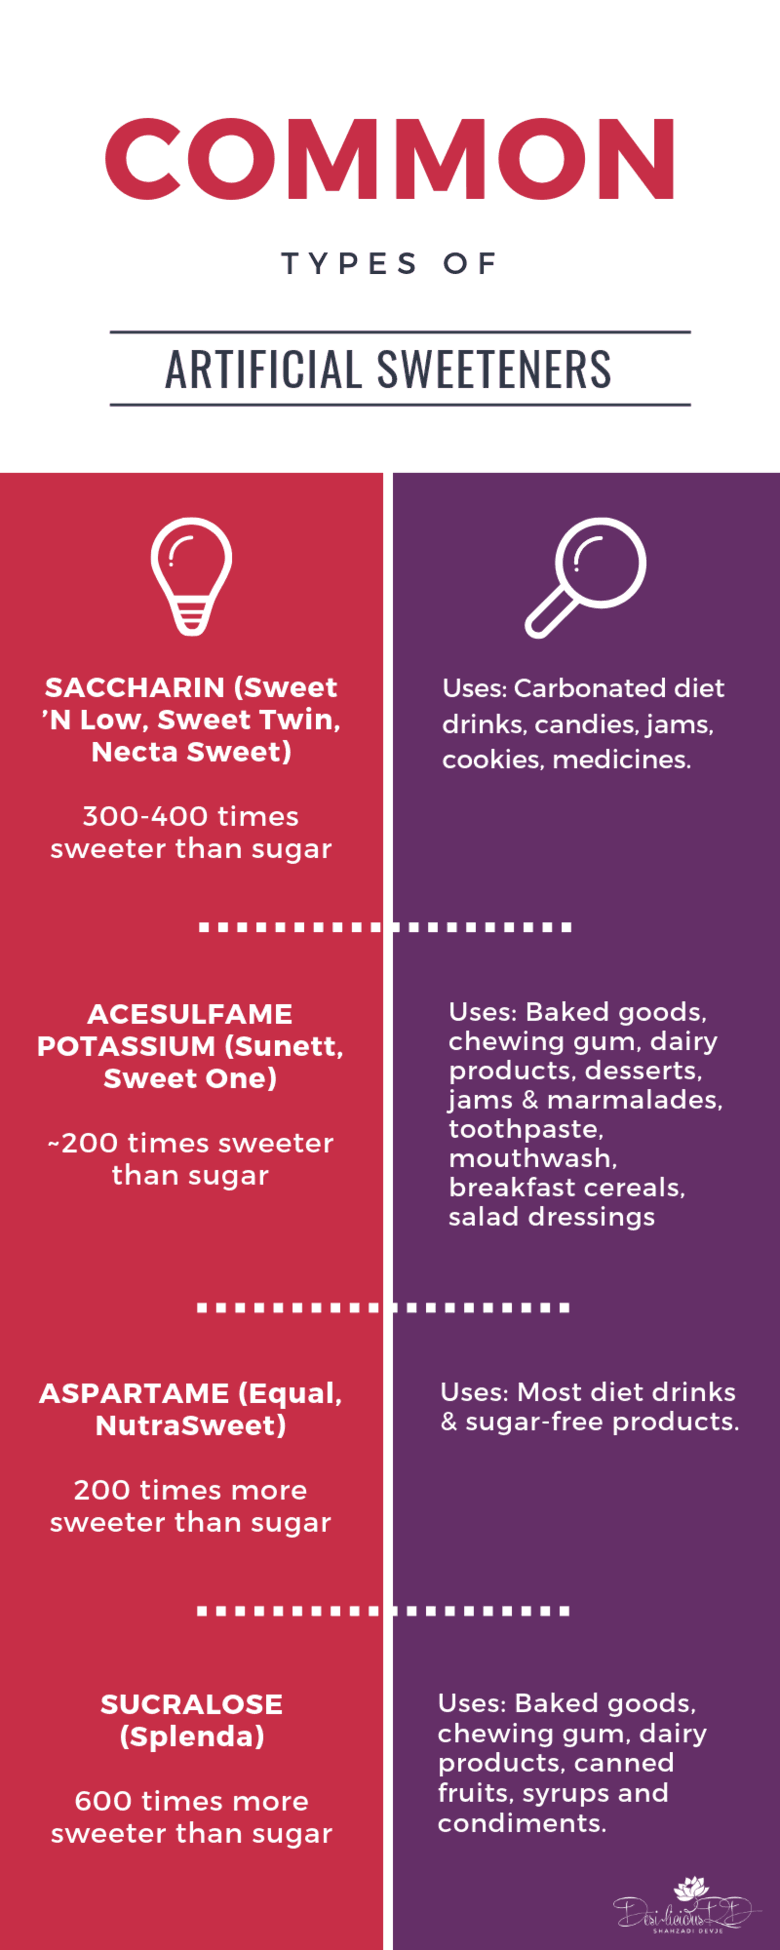 graphic showing the common types of artificial sweeteners, their sweetness relative to added sugar and uses